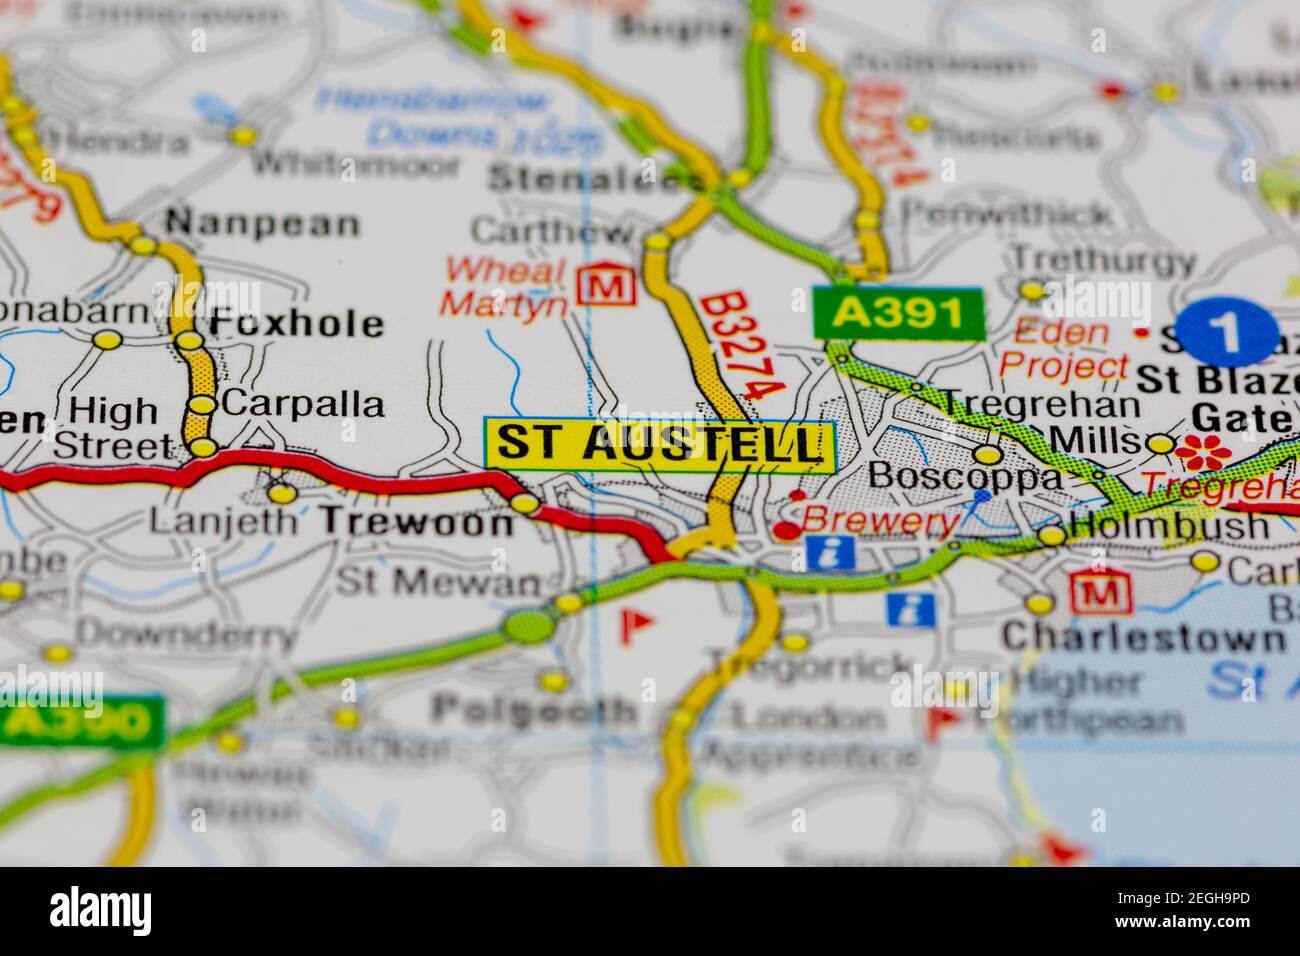 St Austell and surrounding areas shown on a road map or geography map Stock Photo